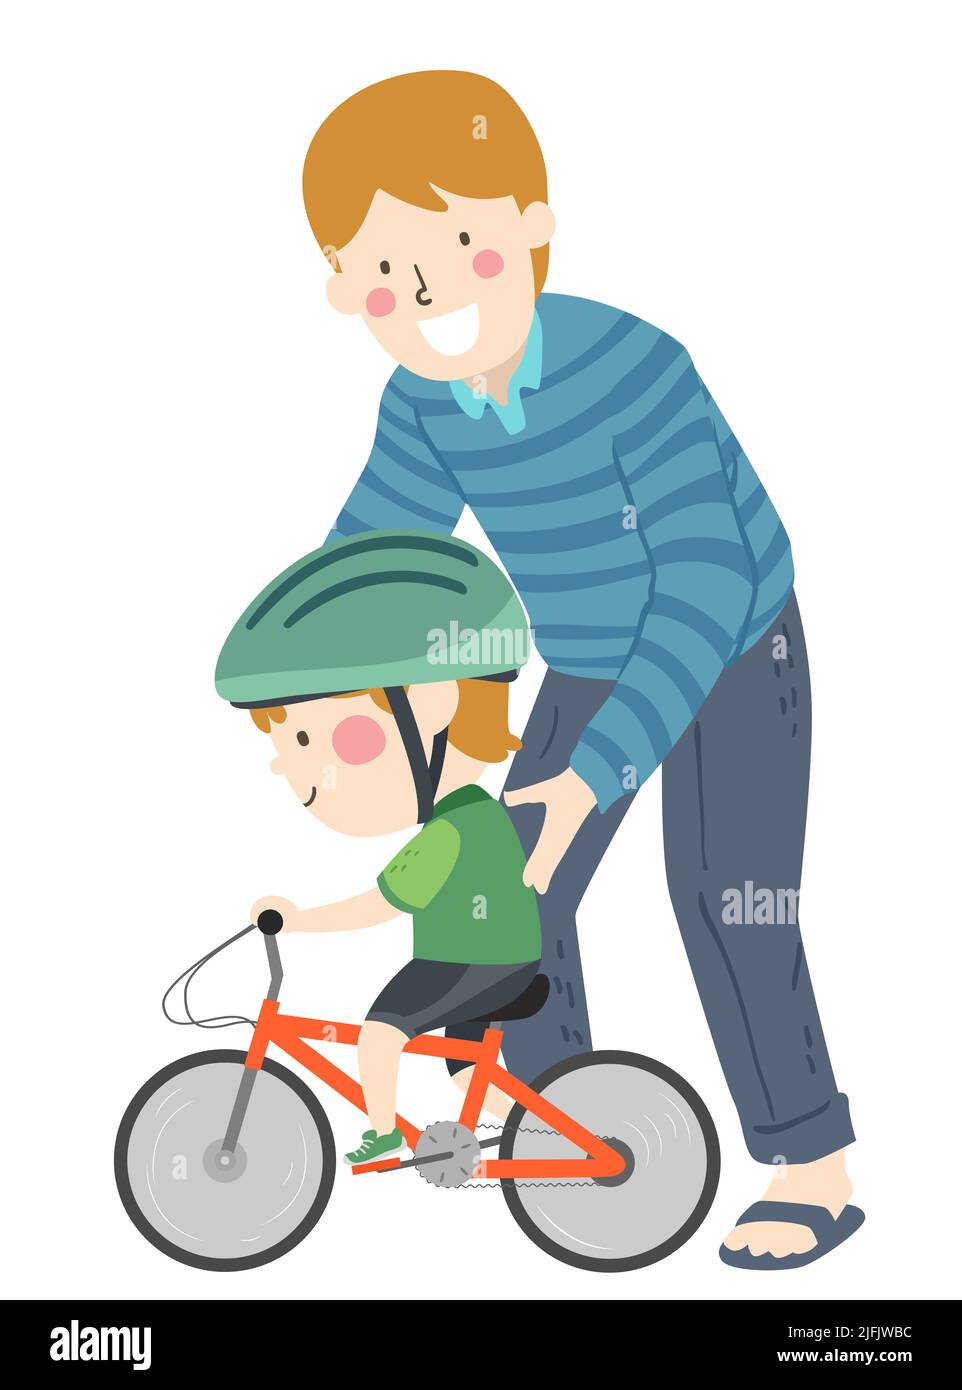 Illustration of Kid Boy Wearing Helmet, Learning to Ride Bicycle with His Dad Supporting Him Stock Photo